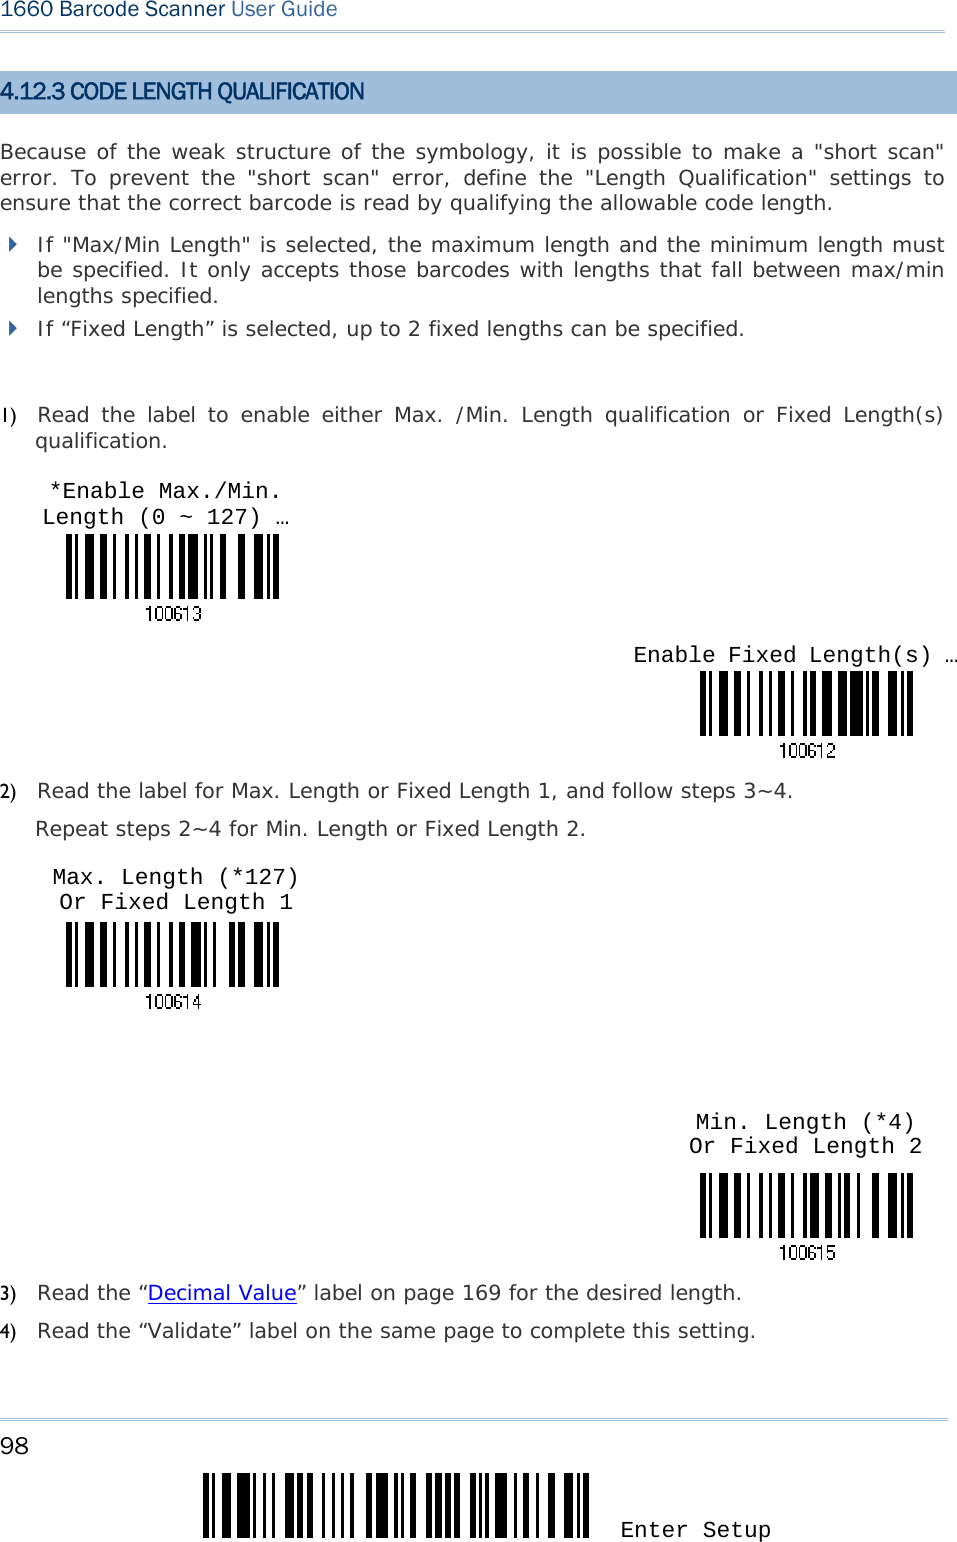 98 Enter Setup 1660 Barcode Scanner User Guide  4.12.3 CODE LENGTH QUALIFICATION Because of the weak structure of the symbology, it is possible to make a &quot;short scan&quot; error. To prevent the &quot;short scan&quot; error, define the &quot;Length Qualification&quot; settings to ensure that the correct barcode is read by qualifying the allowable code length.   If &quot;Max/Min Length&quot; is selected, the maximum length and the minimum length must be specified. It only accepts those barcodes with lengths that fall between max/min lengths specified.  If “Fixed Length” is selected, up to 2 fixed lengths can be specified.  1) Read the label to enable either Max. /Min. Length qualification or Fixed Length(s) qualification.    2) Read the label for Max. Length or Fixed Length 1, and follow steps 3~4. Repeat steps 2~4 for Min. Length or Fixed Length 2.       3) Read the “Decimal Value” label on page 169 for the desired length.  4) Read the “Validate” label on the same page to complete this setting. Enable Fixed Length(s) …*Enable Max./Min. Length (0 ~ 127) … Min. Length (*4) Or Fixed Length 2 Max. Length (*127) Or Fixed Length 1 